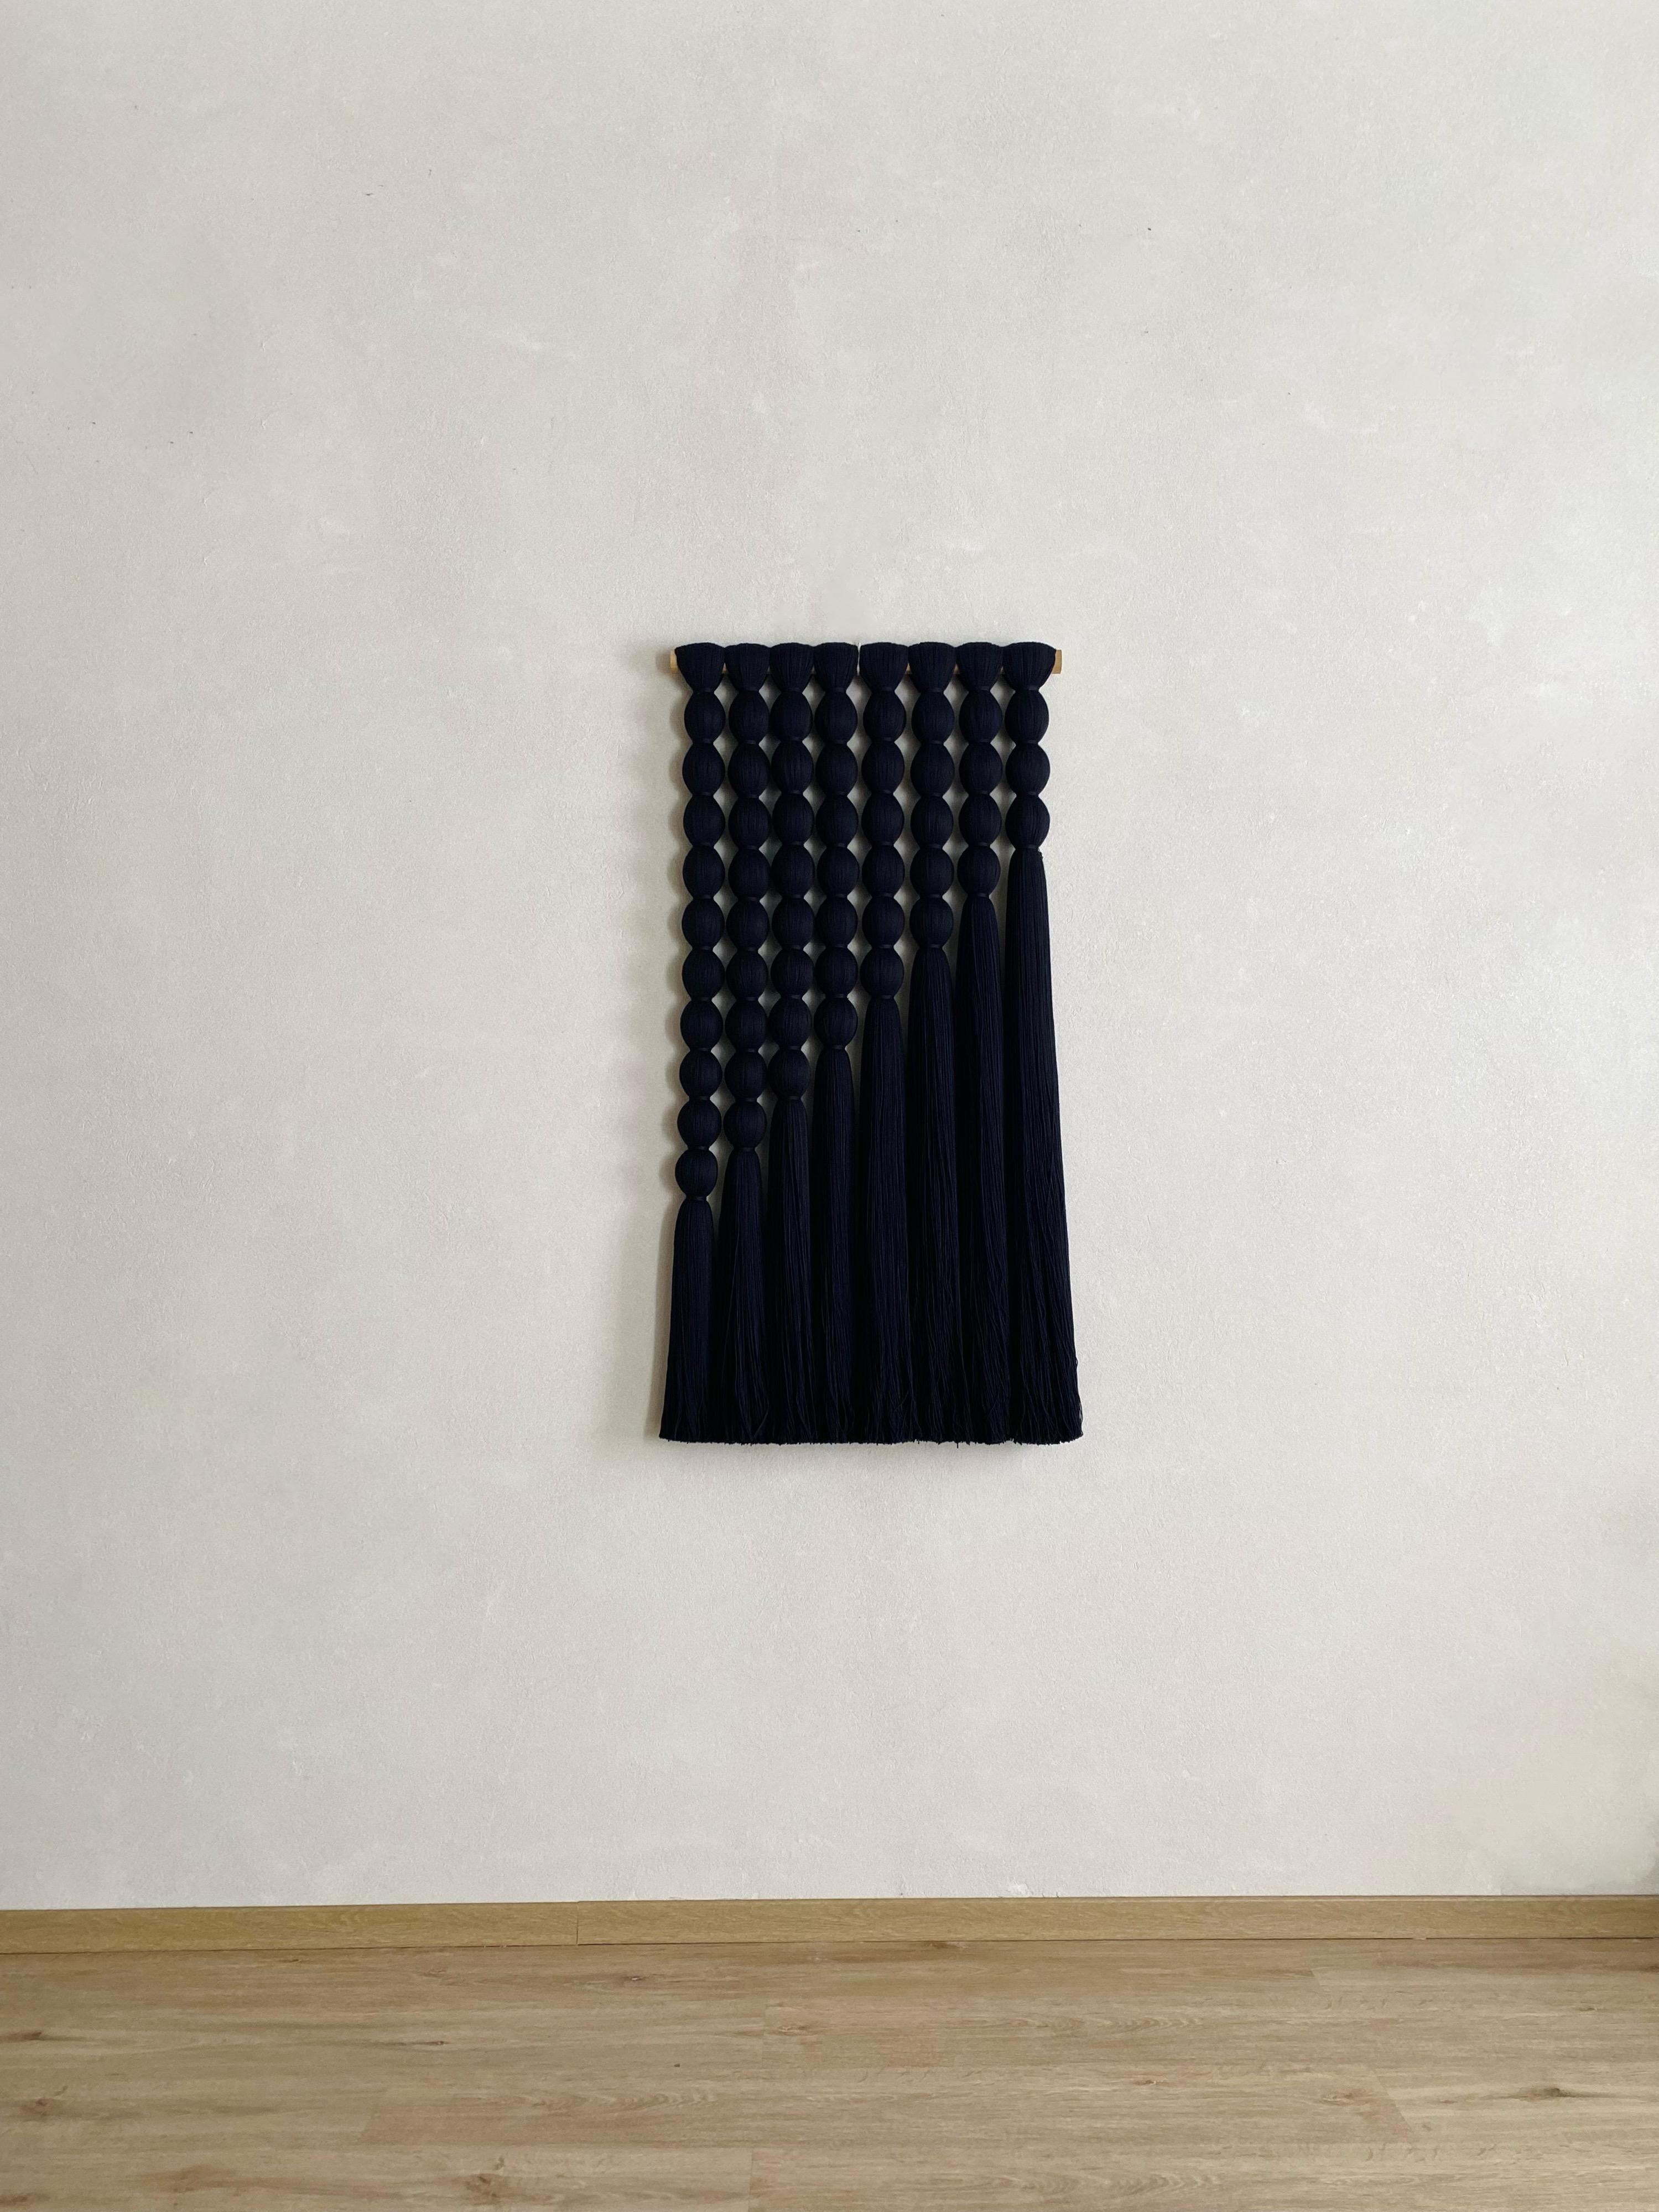 This dramatic wall hanging is an impressive statement piece for almost any room.Custom sizes and others colors available by request.
Each piece is completely made to order and is available to ship 8-9 weeks after ordering. 

Handmade by weavers in